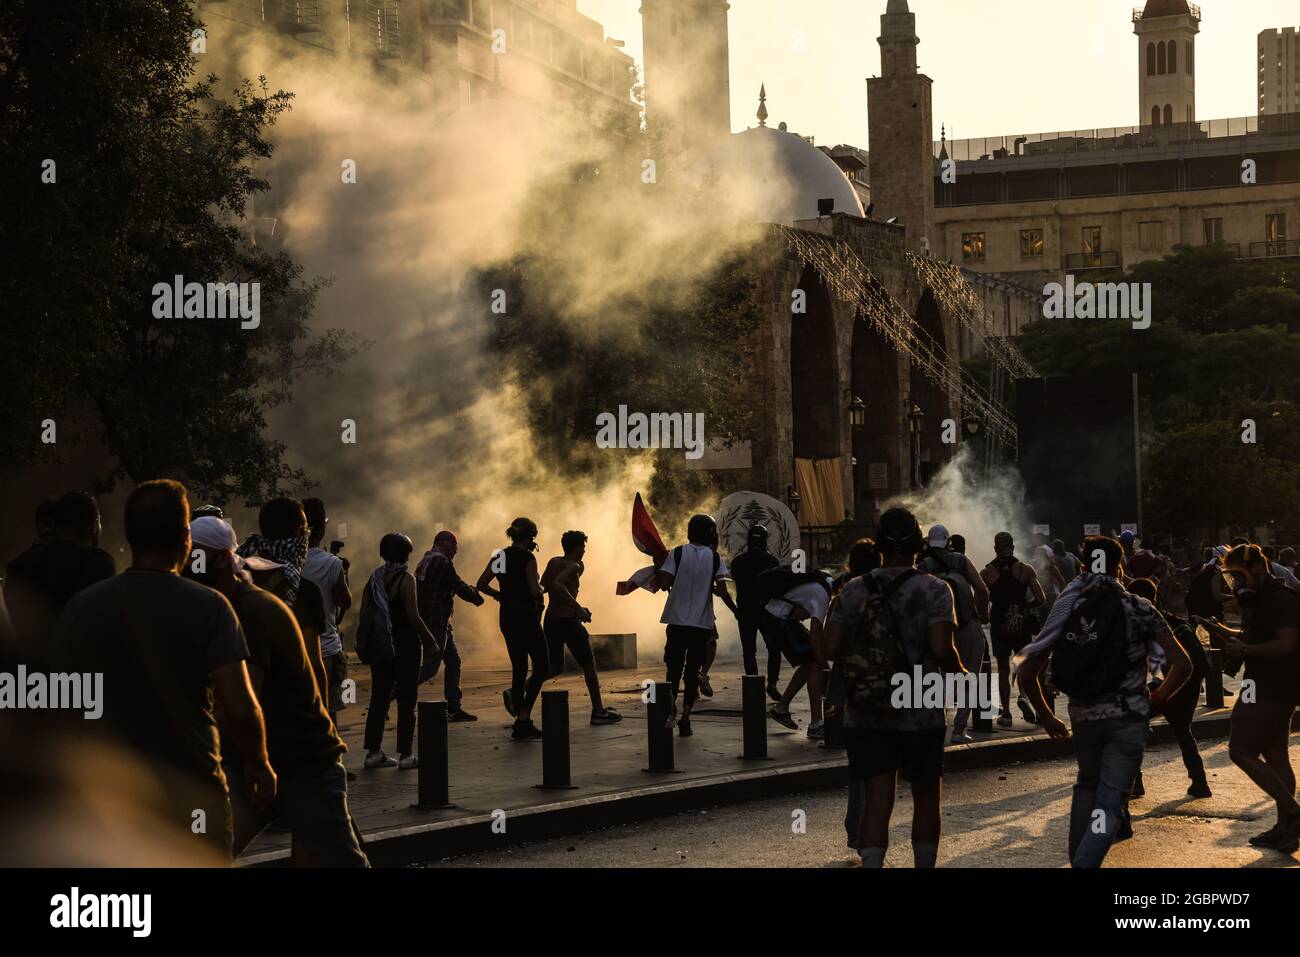 Beirut, Lebanon, 4 August 2021. People protesting failure to find those responsible for the Beirut Blast and hold them responsible throw stones at security forces deploying heavy tear gas. Stock Photo